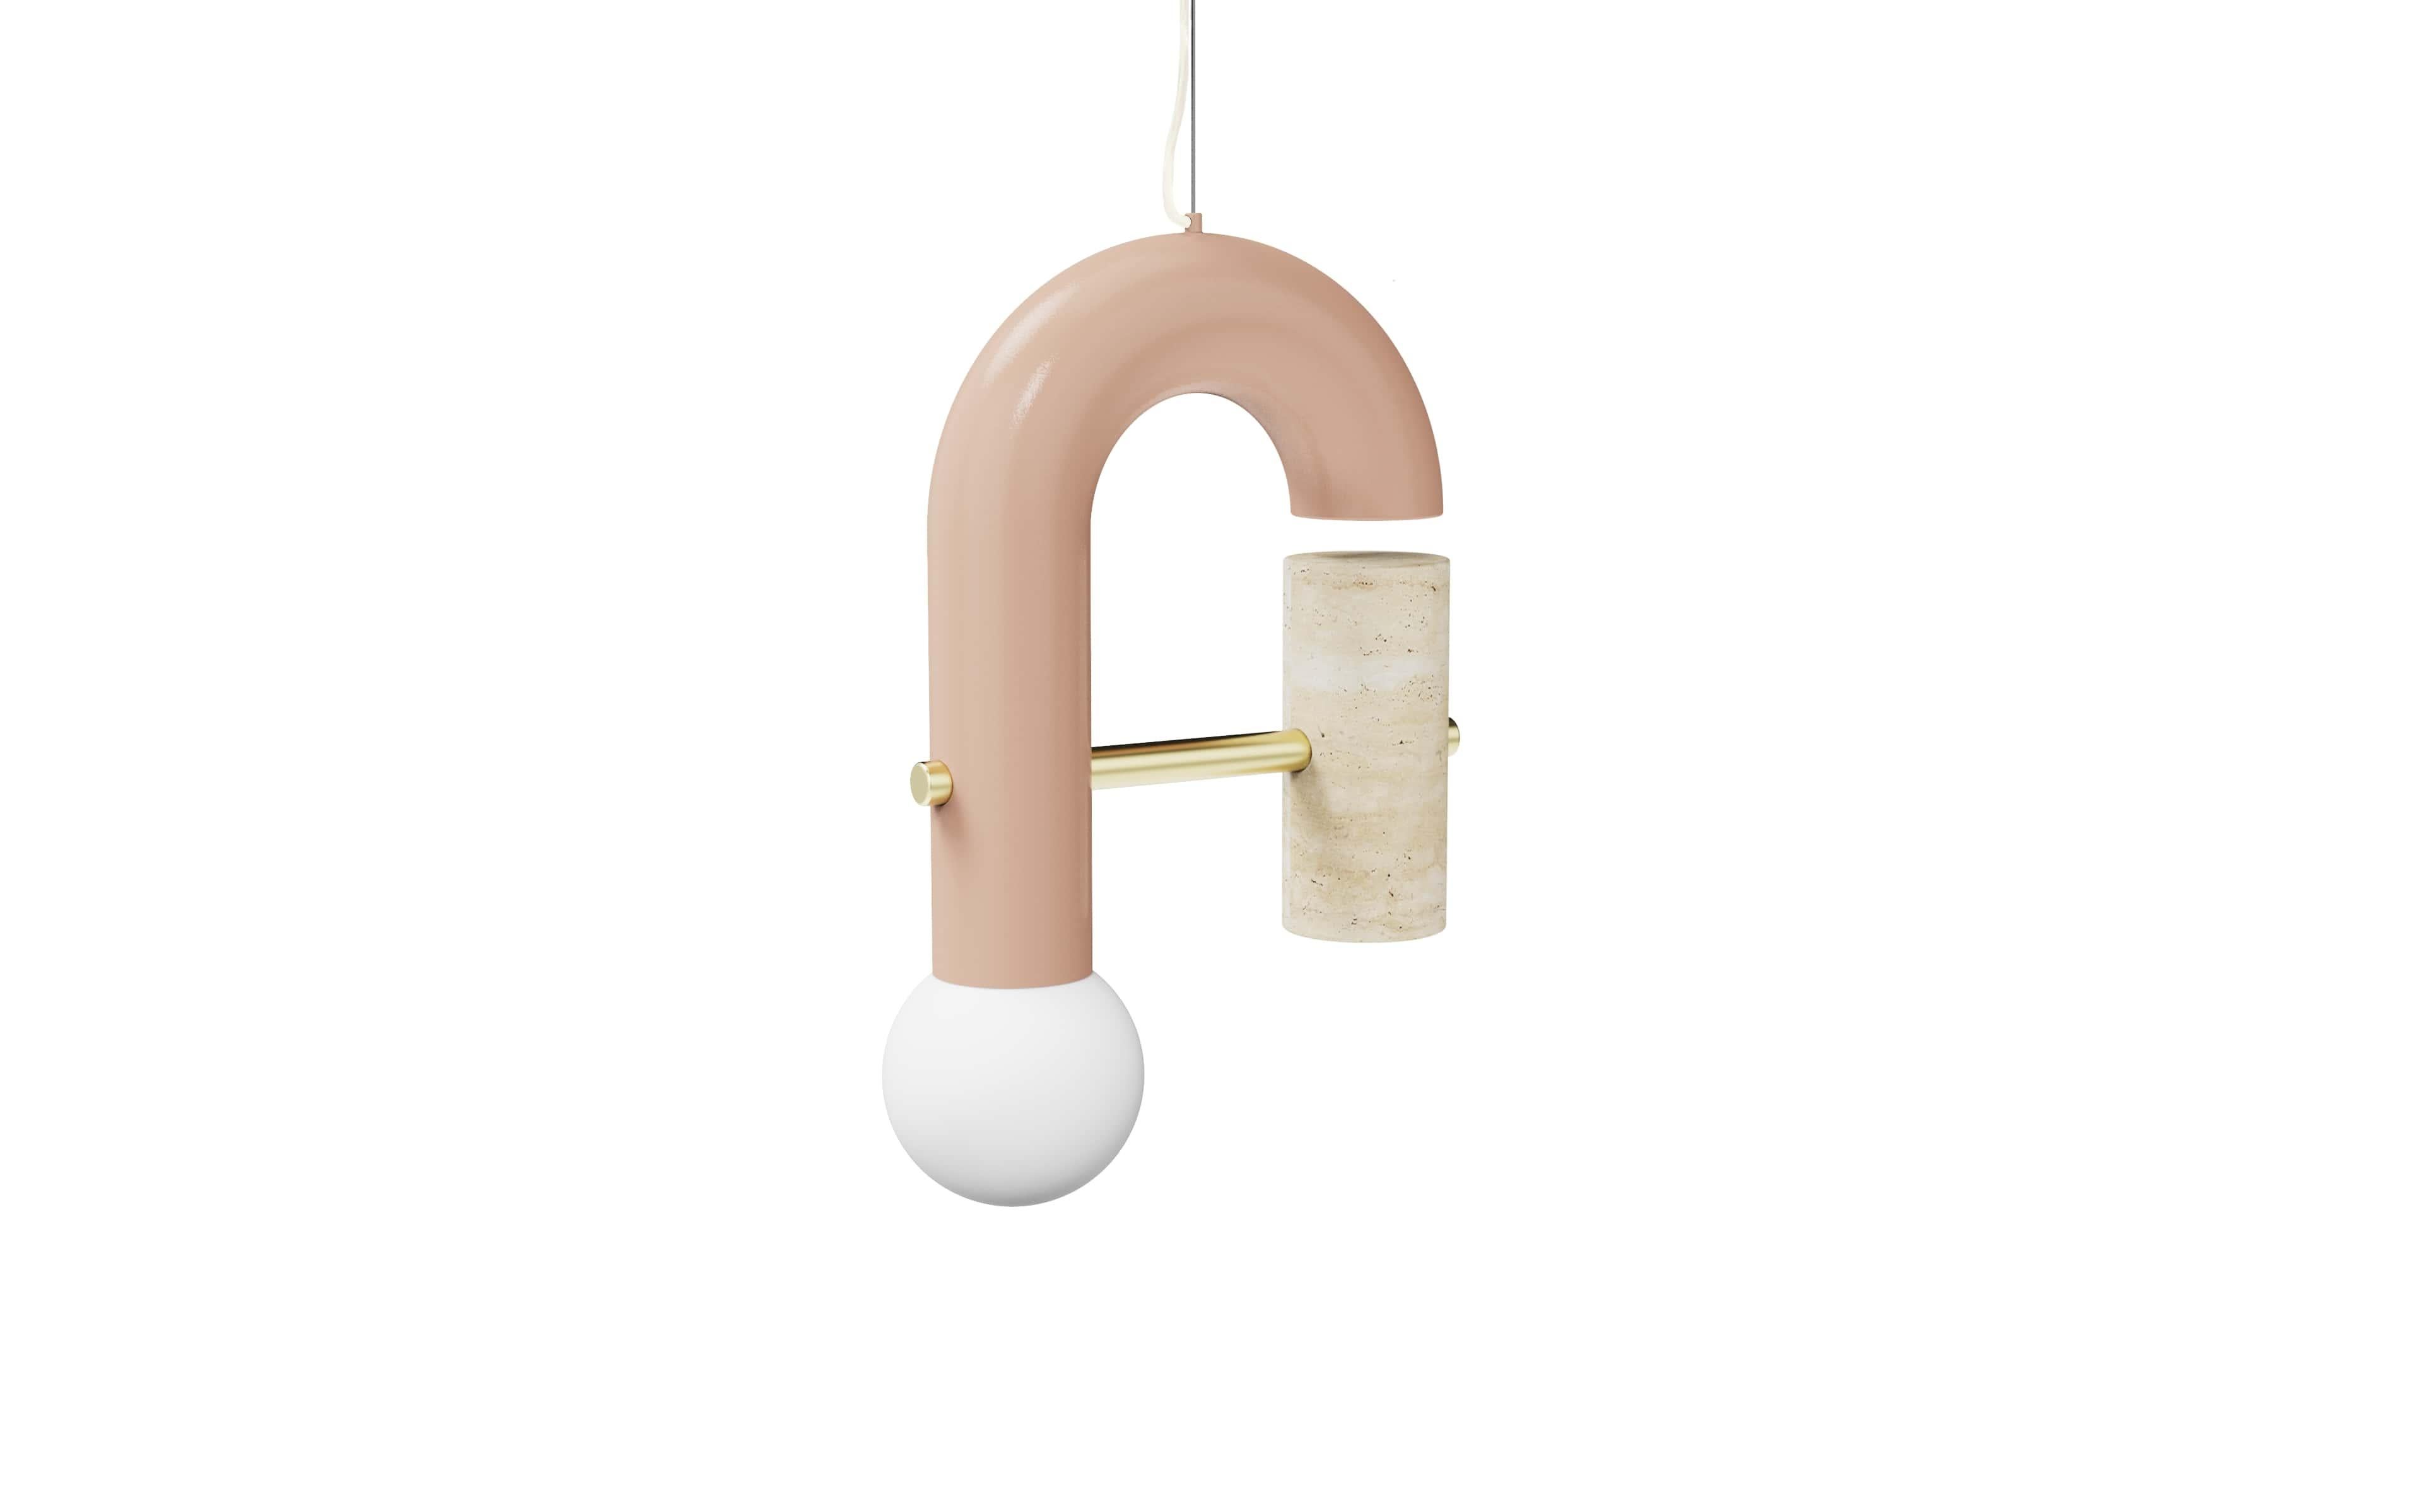 Portuguese Pyppe Table Lamp by Dooq